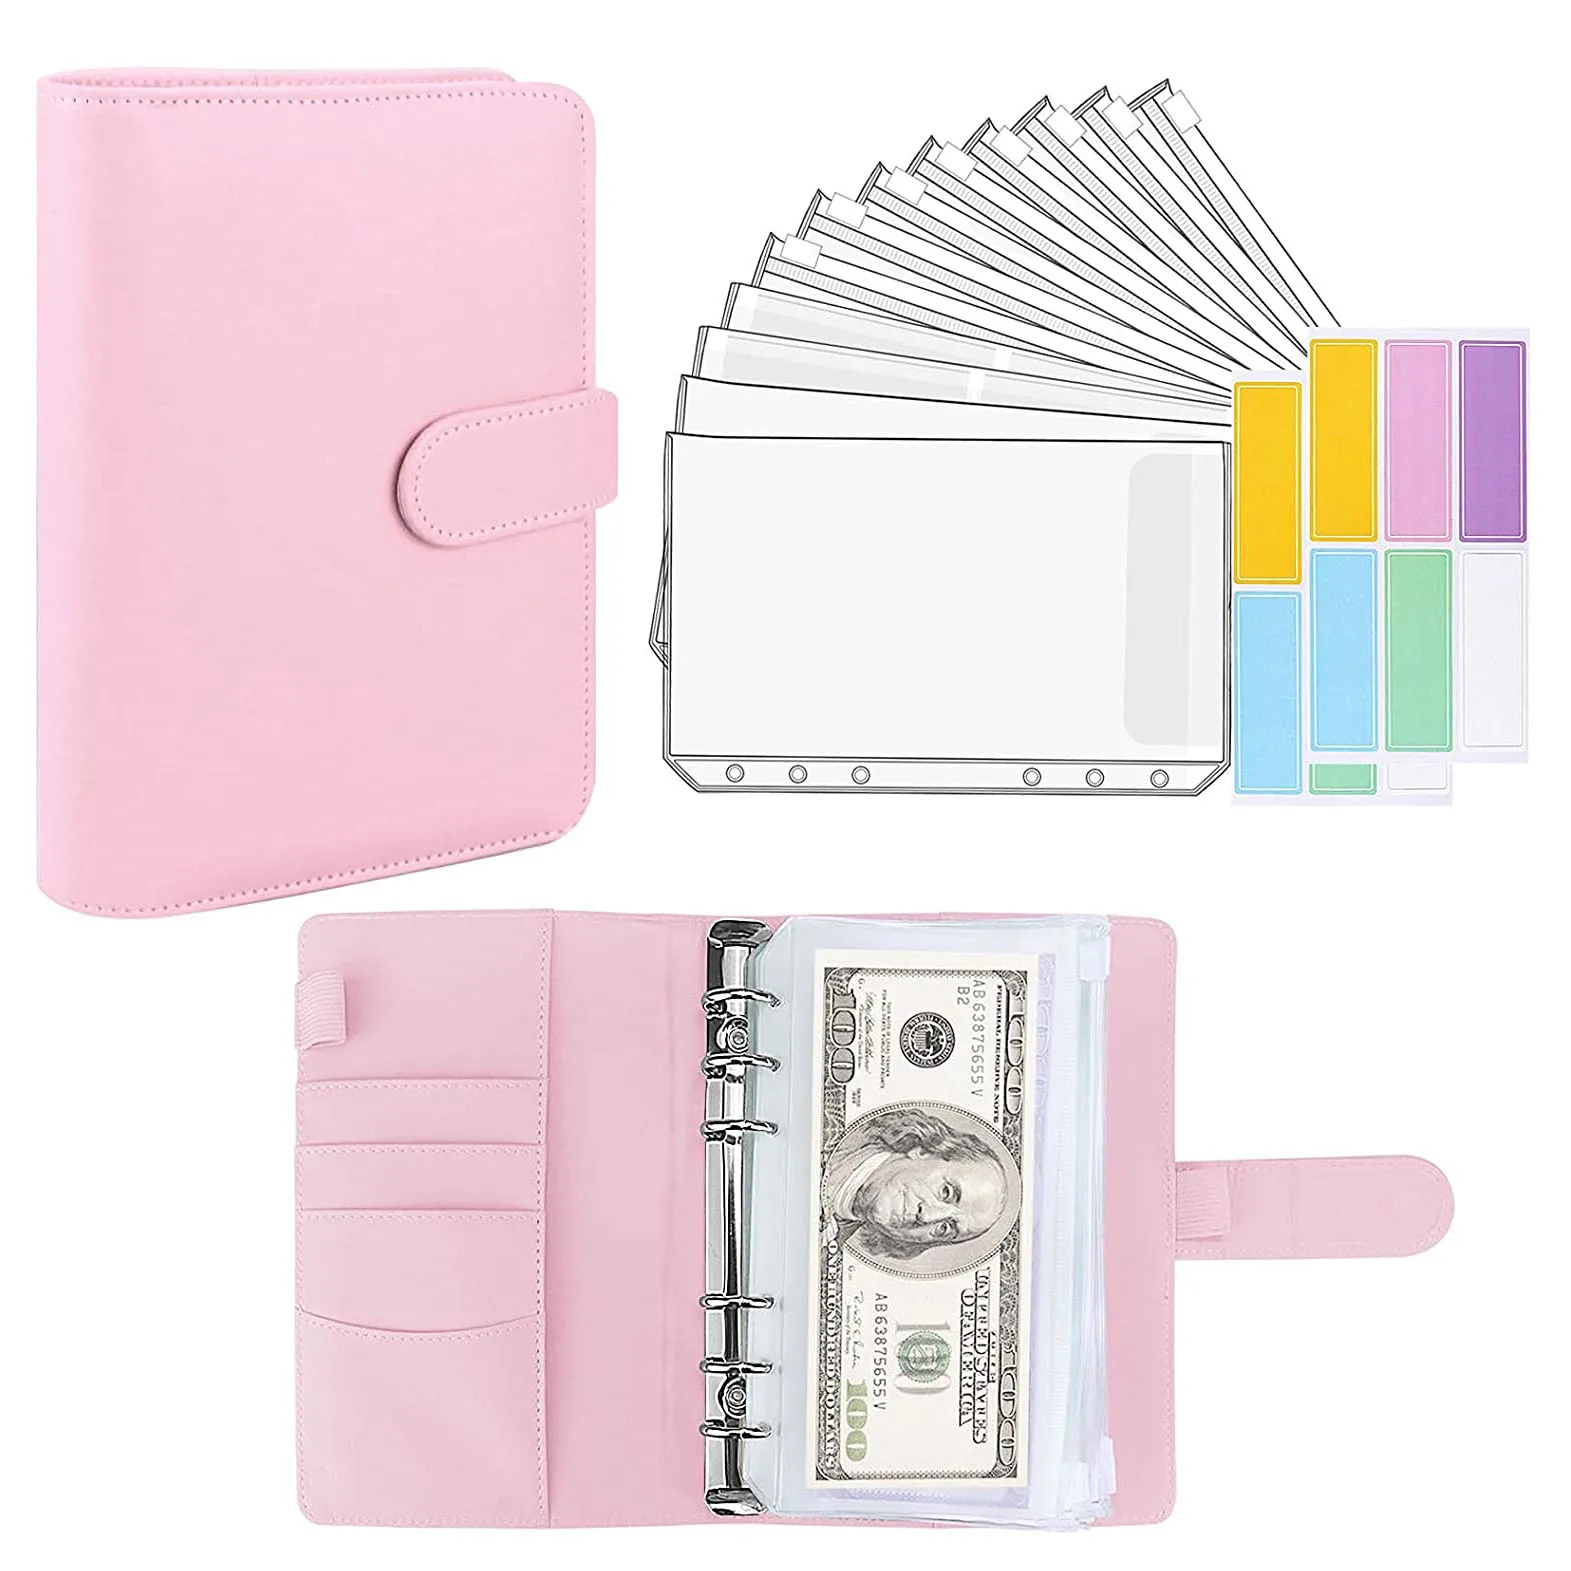 15 Pieces A6 Binder Budget Planner Cash Envelope System with Budget Envelopes Binder Pockets Cash Envelope Wallet for Budgeting a5 size pu leather binder budget planner organizer with 12pcs binder pockets cash envelopes system for budgeting money saving